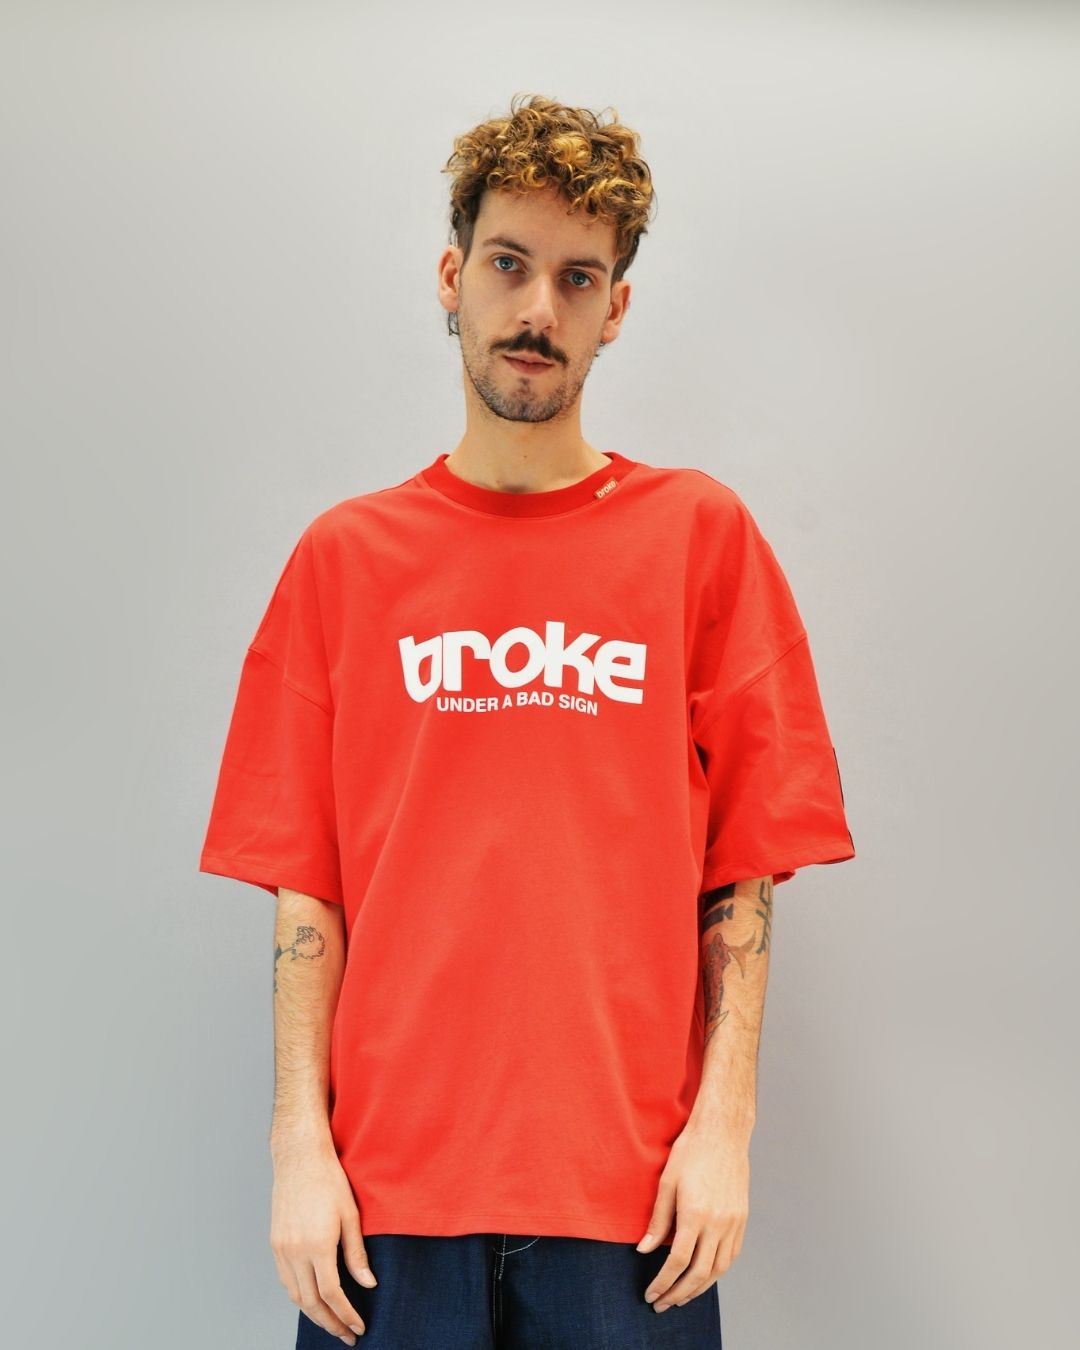 ISTITUTIONAL OVER RED - Tee